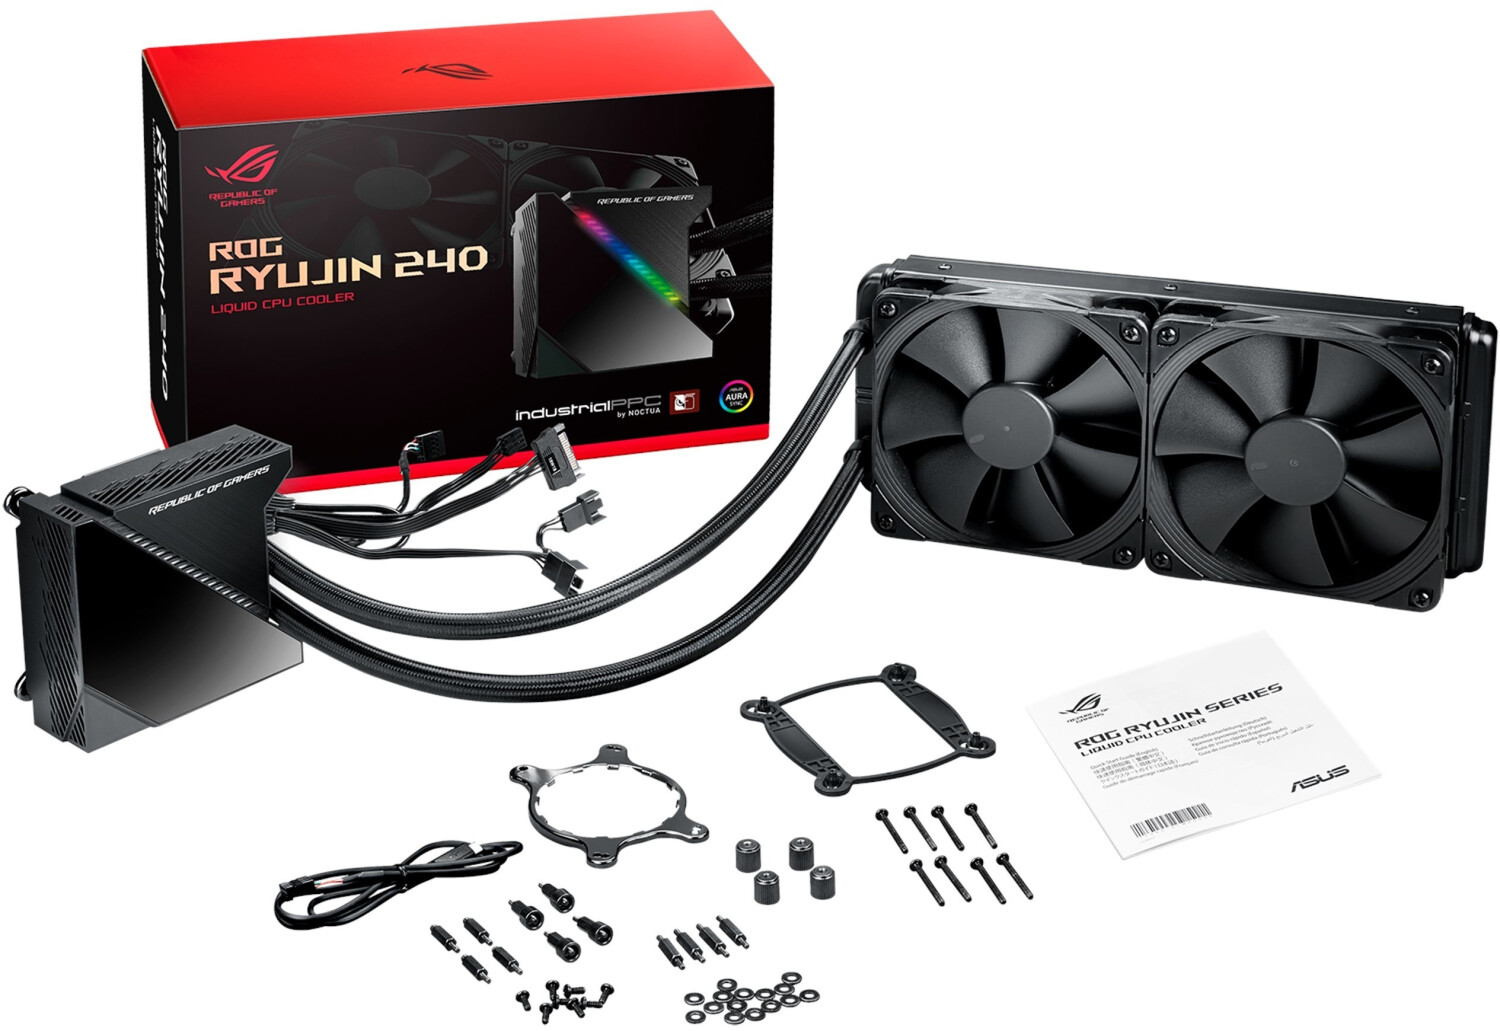 Buy Asus ROG RYUJIN 240 from £171.99 (Today) – Best Deals on idealo.co.uk